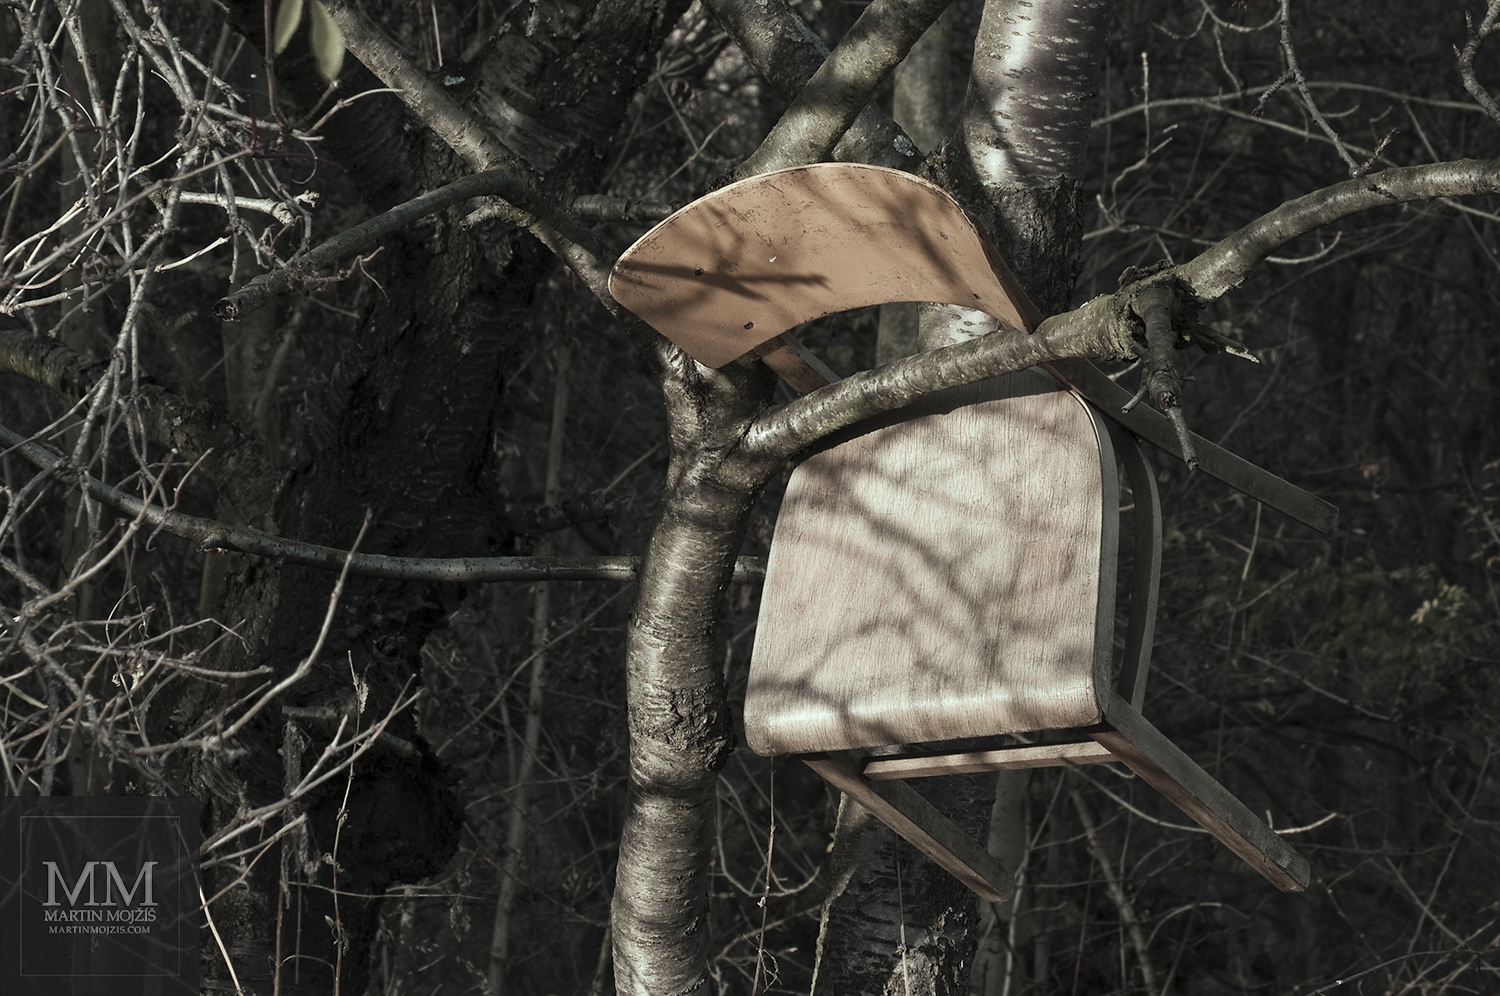 The chair hidden in the branches of trees. Fine Art photograph of Martin Mojzis with the title CHAIR II.